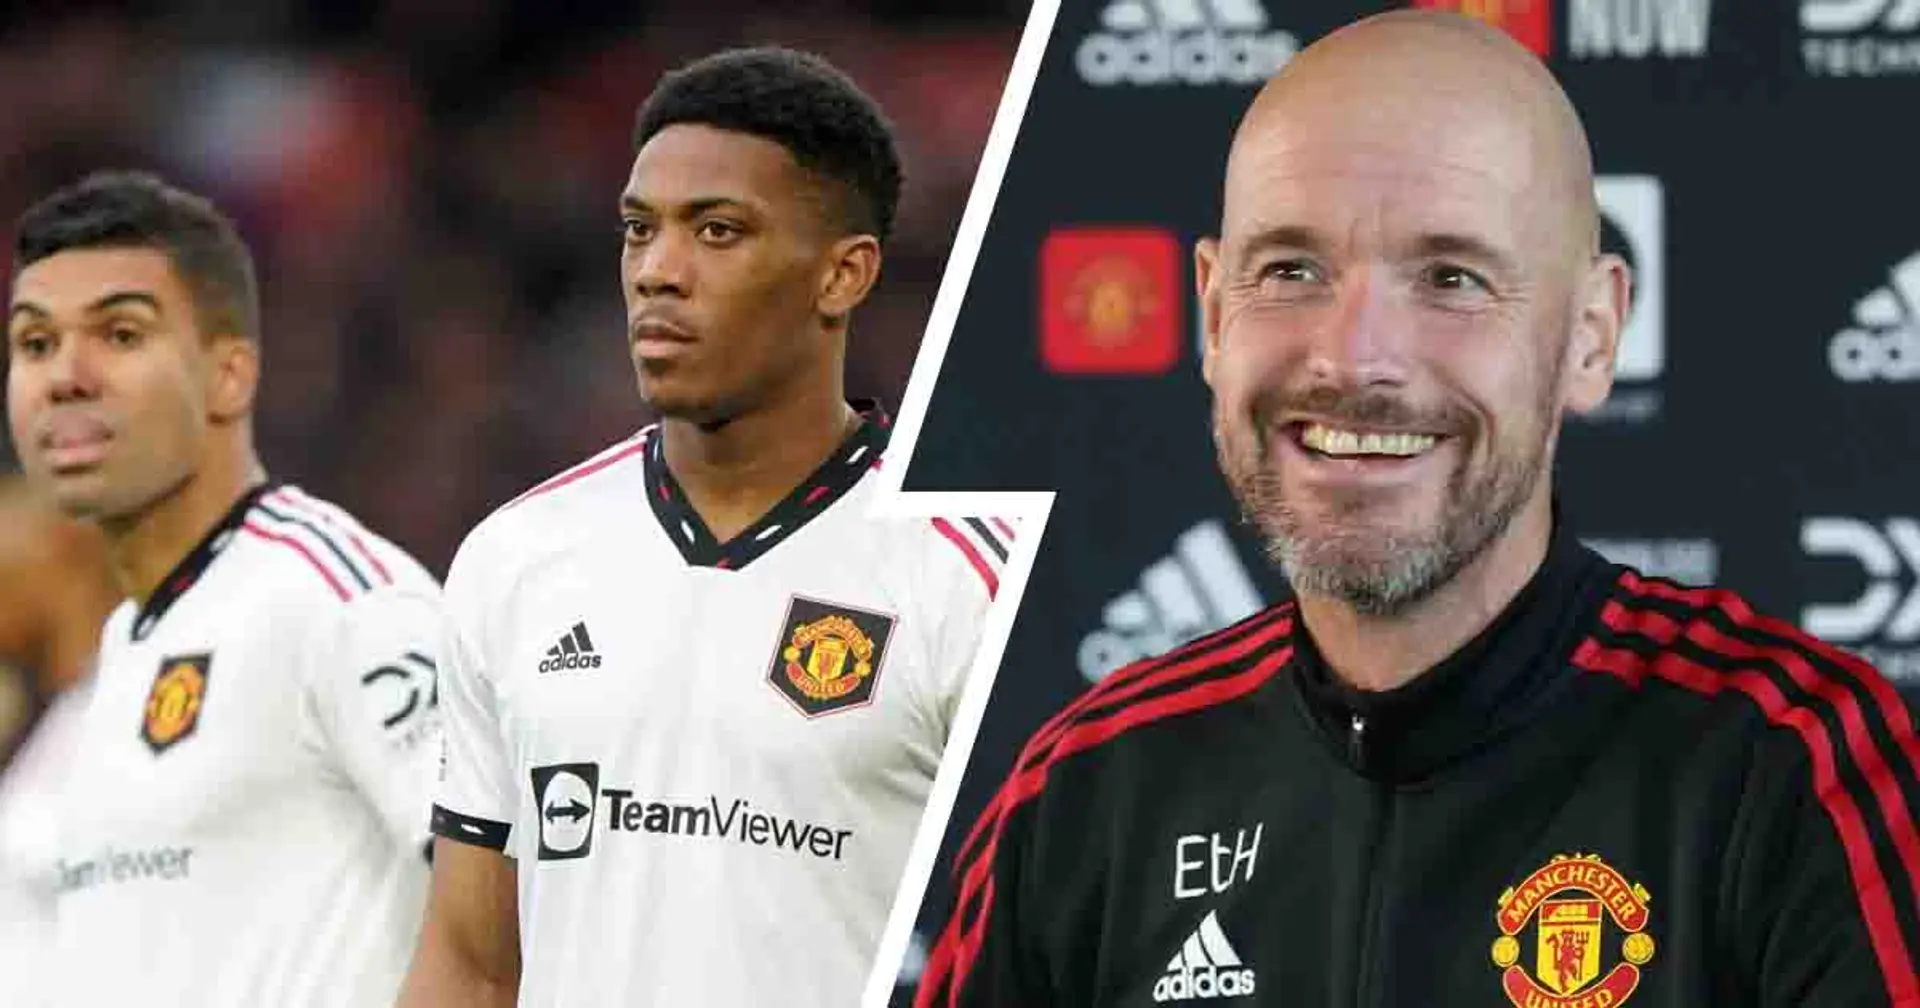 'We have enough players': Ten Hag names 5 players who can solve United's goal-scoring problems